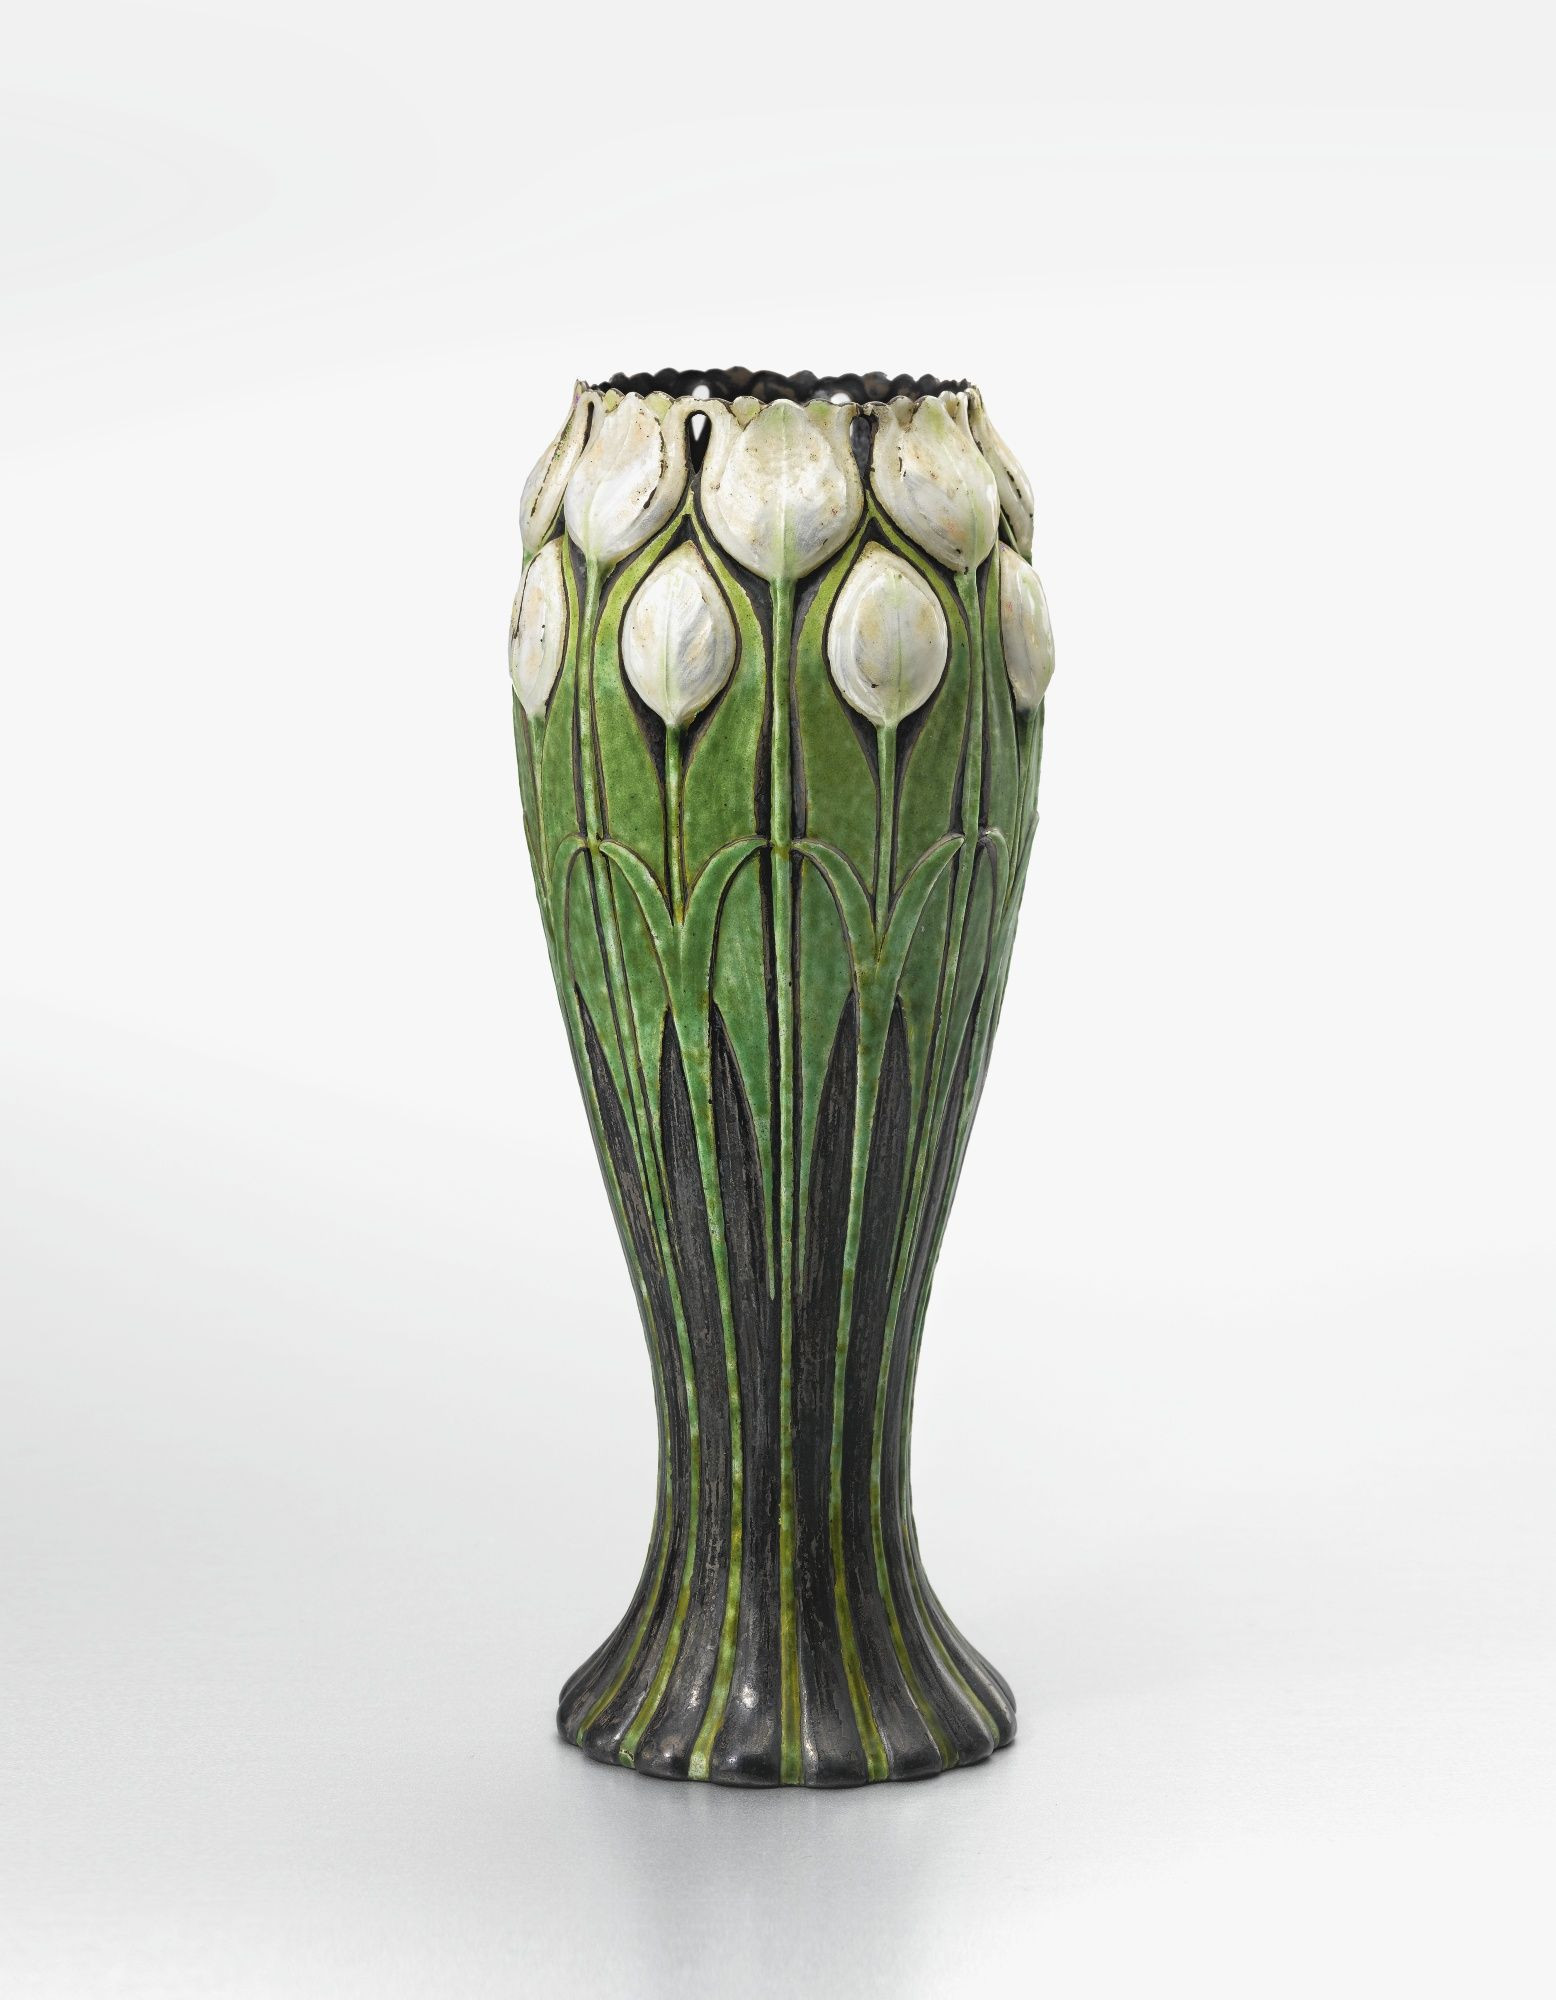 14 Ideal Lc Tiffany Favrile Vase 2024 free download lc tiffany favrile vase of tiffany co tulip vase impressed tiffany co 16568 makers 4105 pertaining to tiffany co tulip vase impressed tiffany co 16568 makers